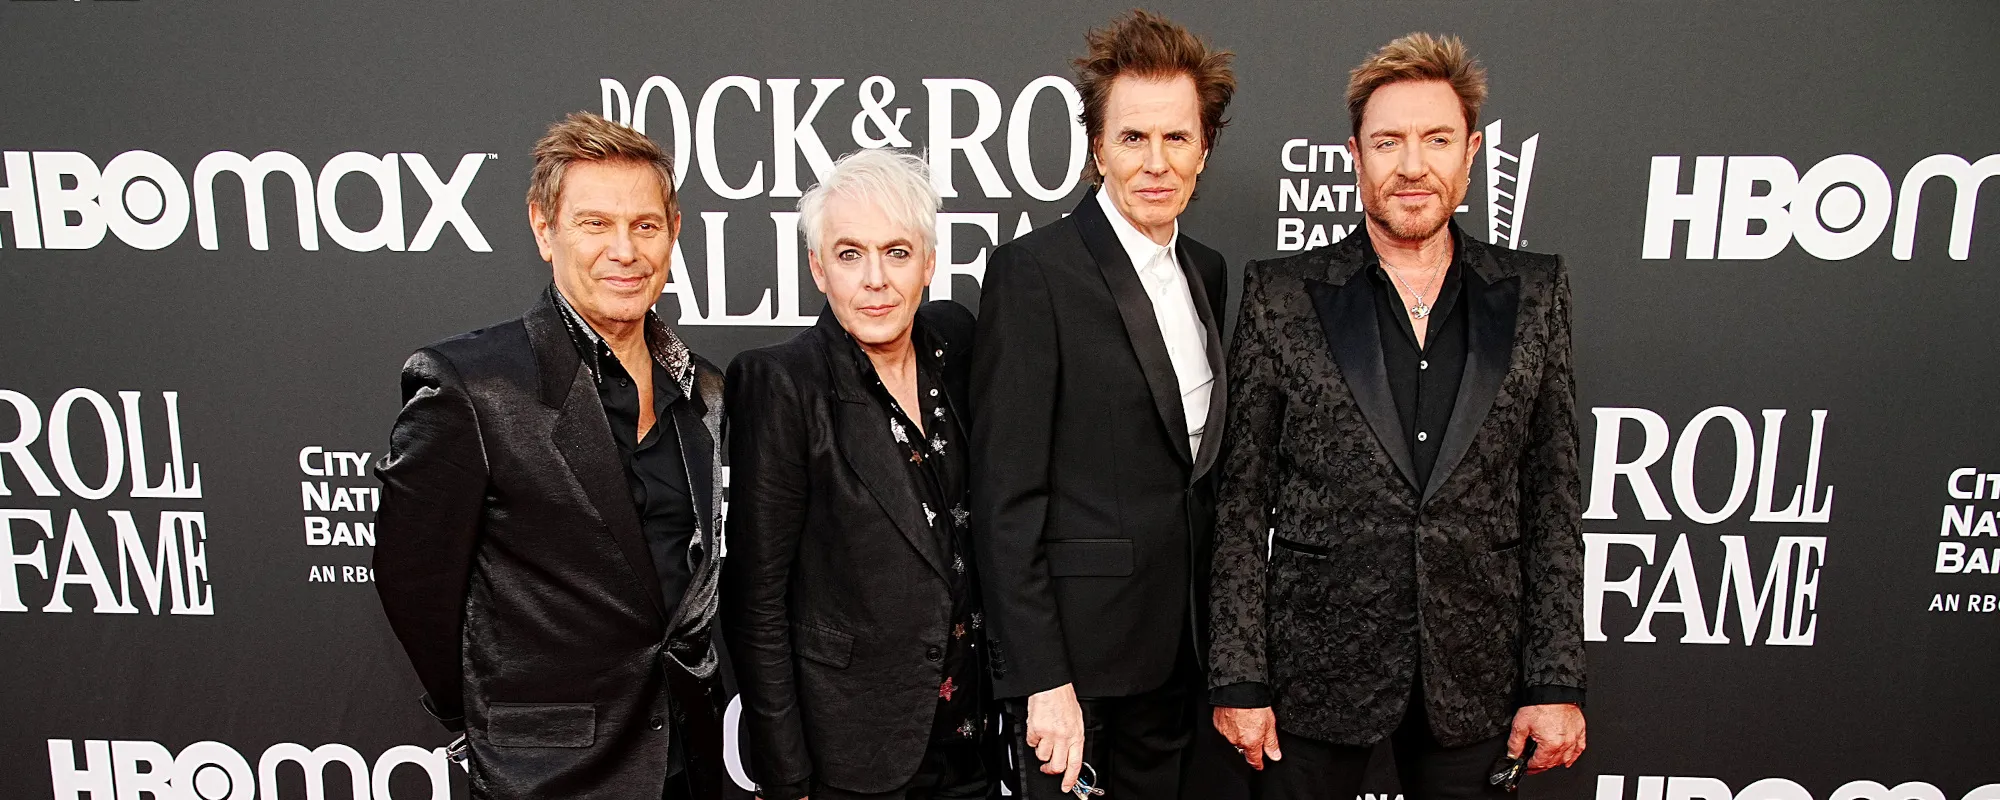 Duran Duran Break News That Former Member Andy Taylor Has Stage 4 Cancer During Band’s Rock Hall of Fame Induction